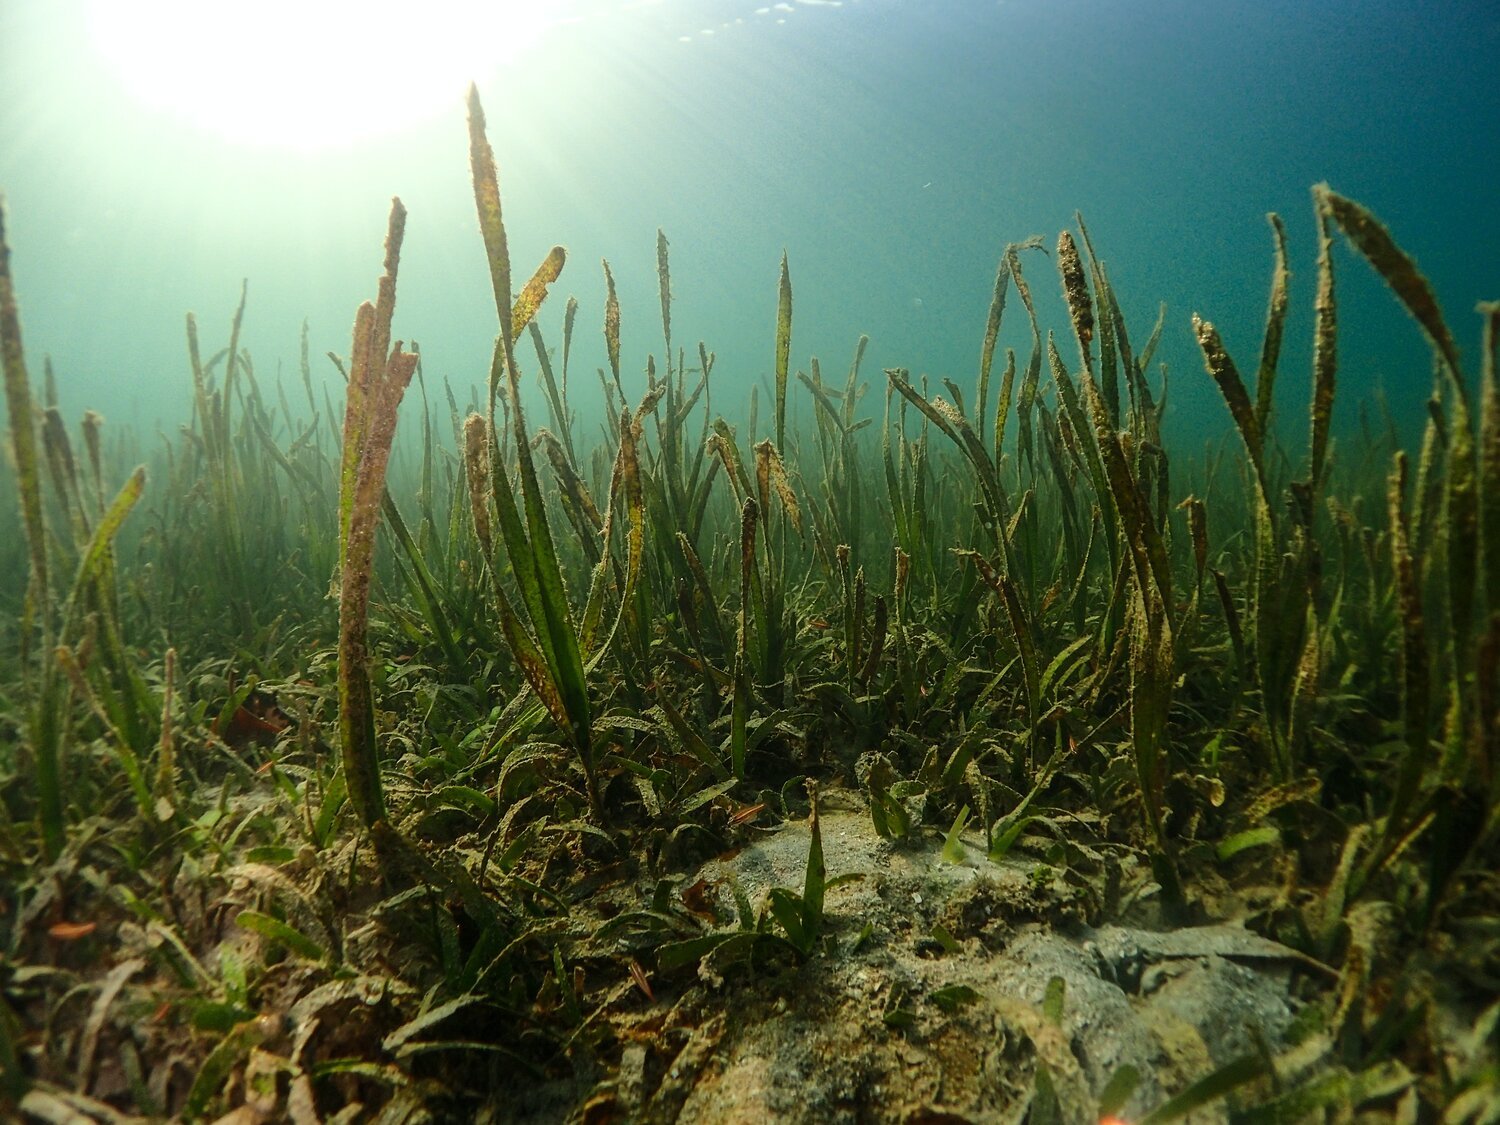 Hidden Heroes in Peril: Seagrass Meadows Face Extinction Threat